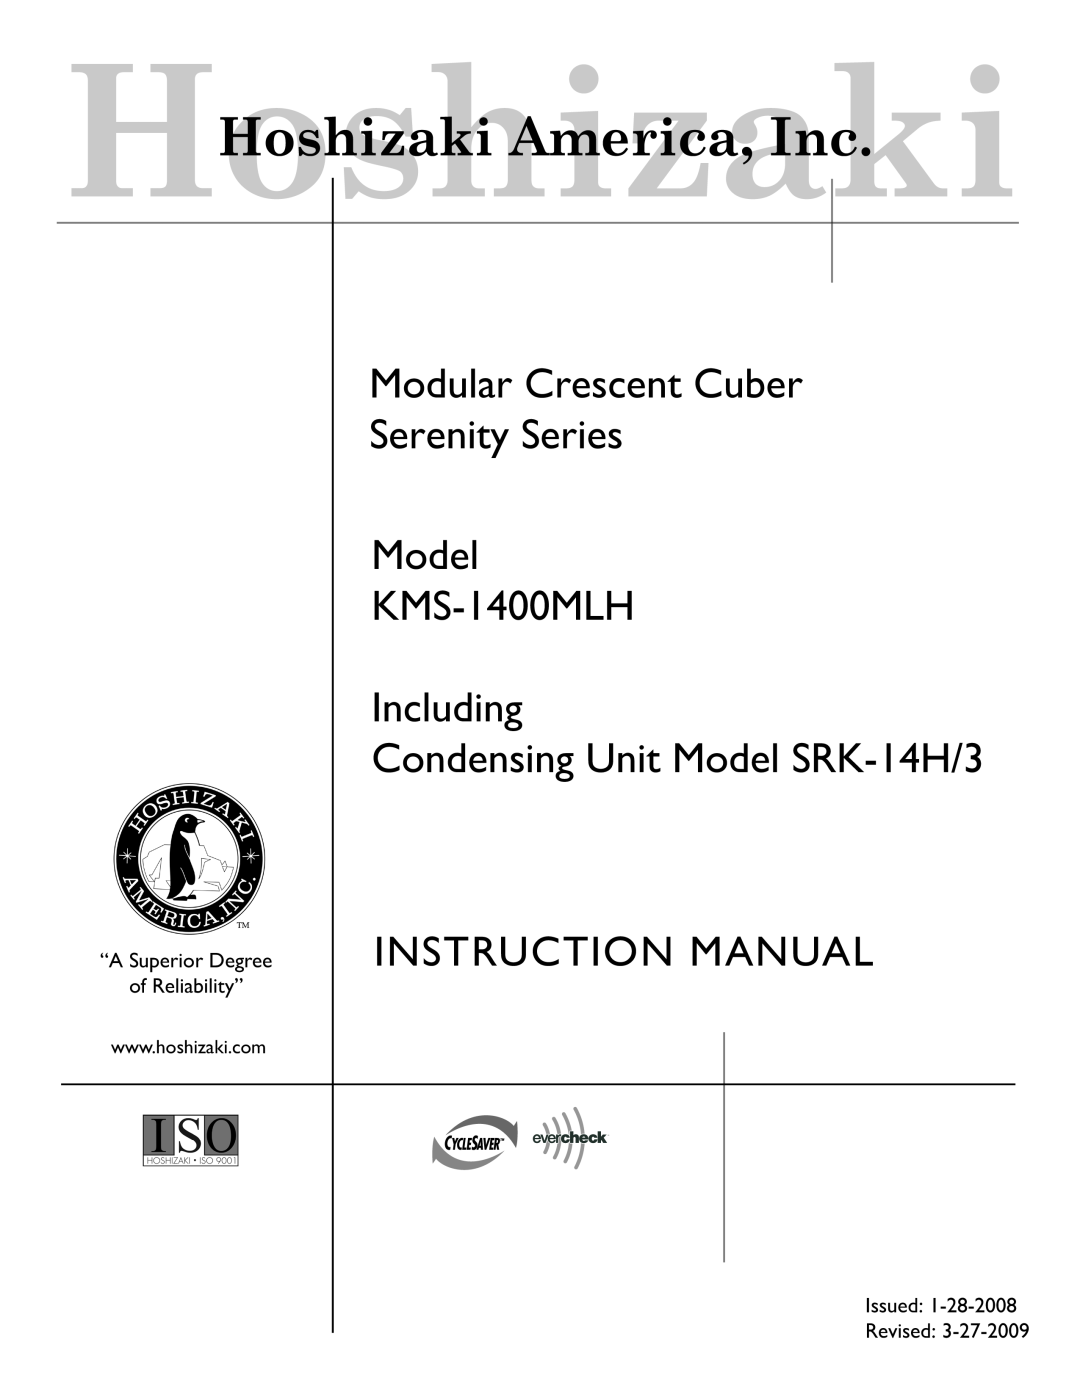 Hoshizaki instruction manual Modular Crescent Cuber Serenity Series Model, KMS-1400MLH Including, Issued Revised 